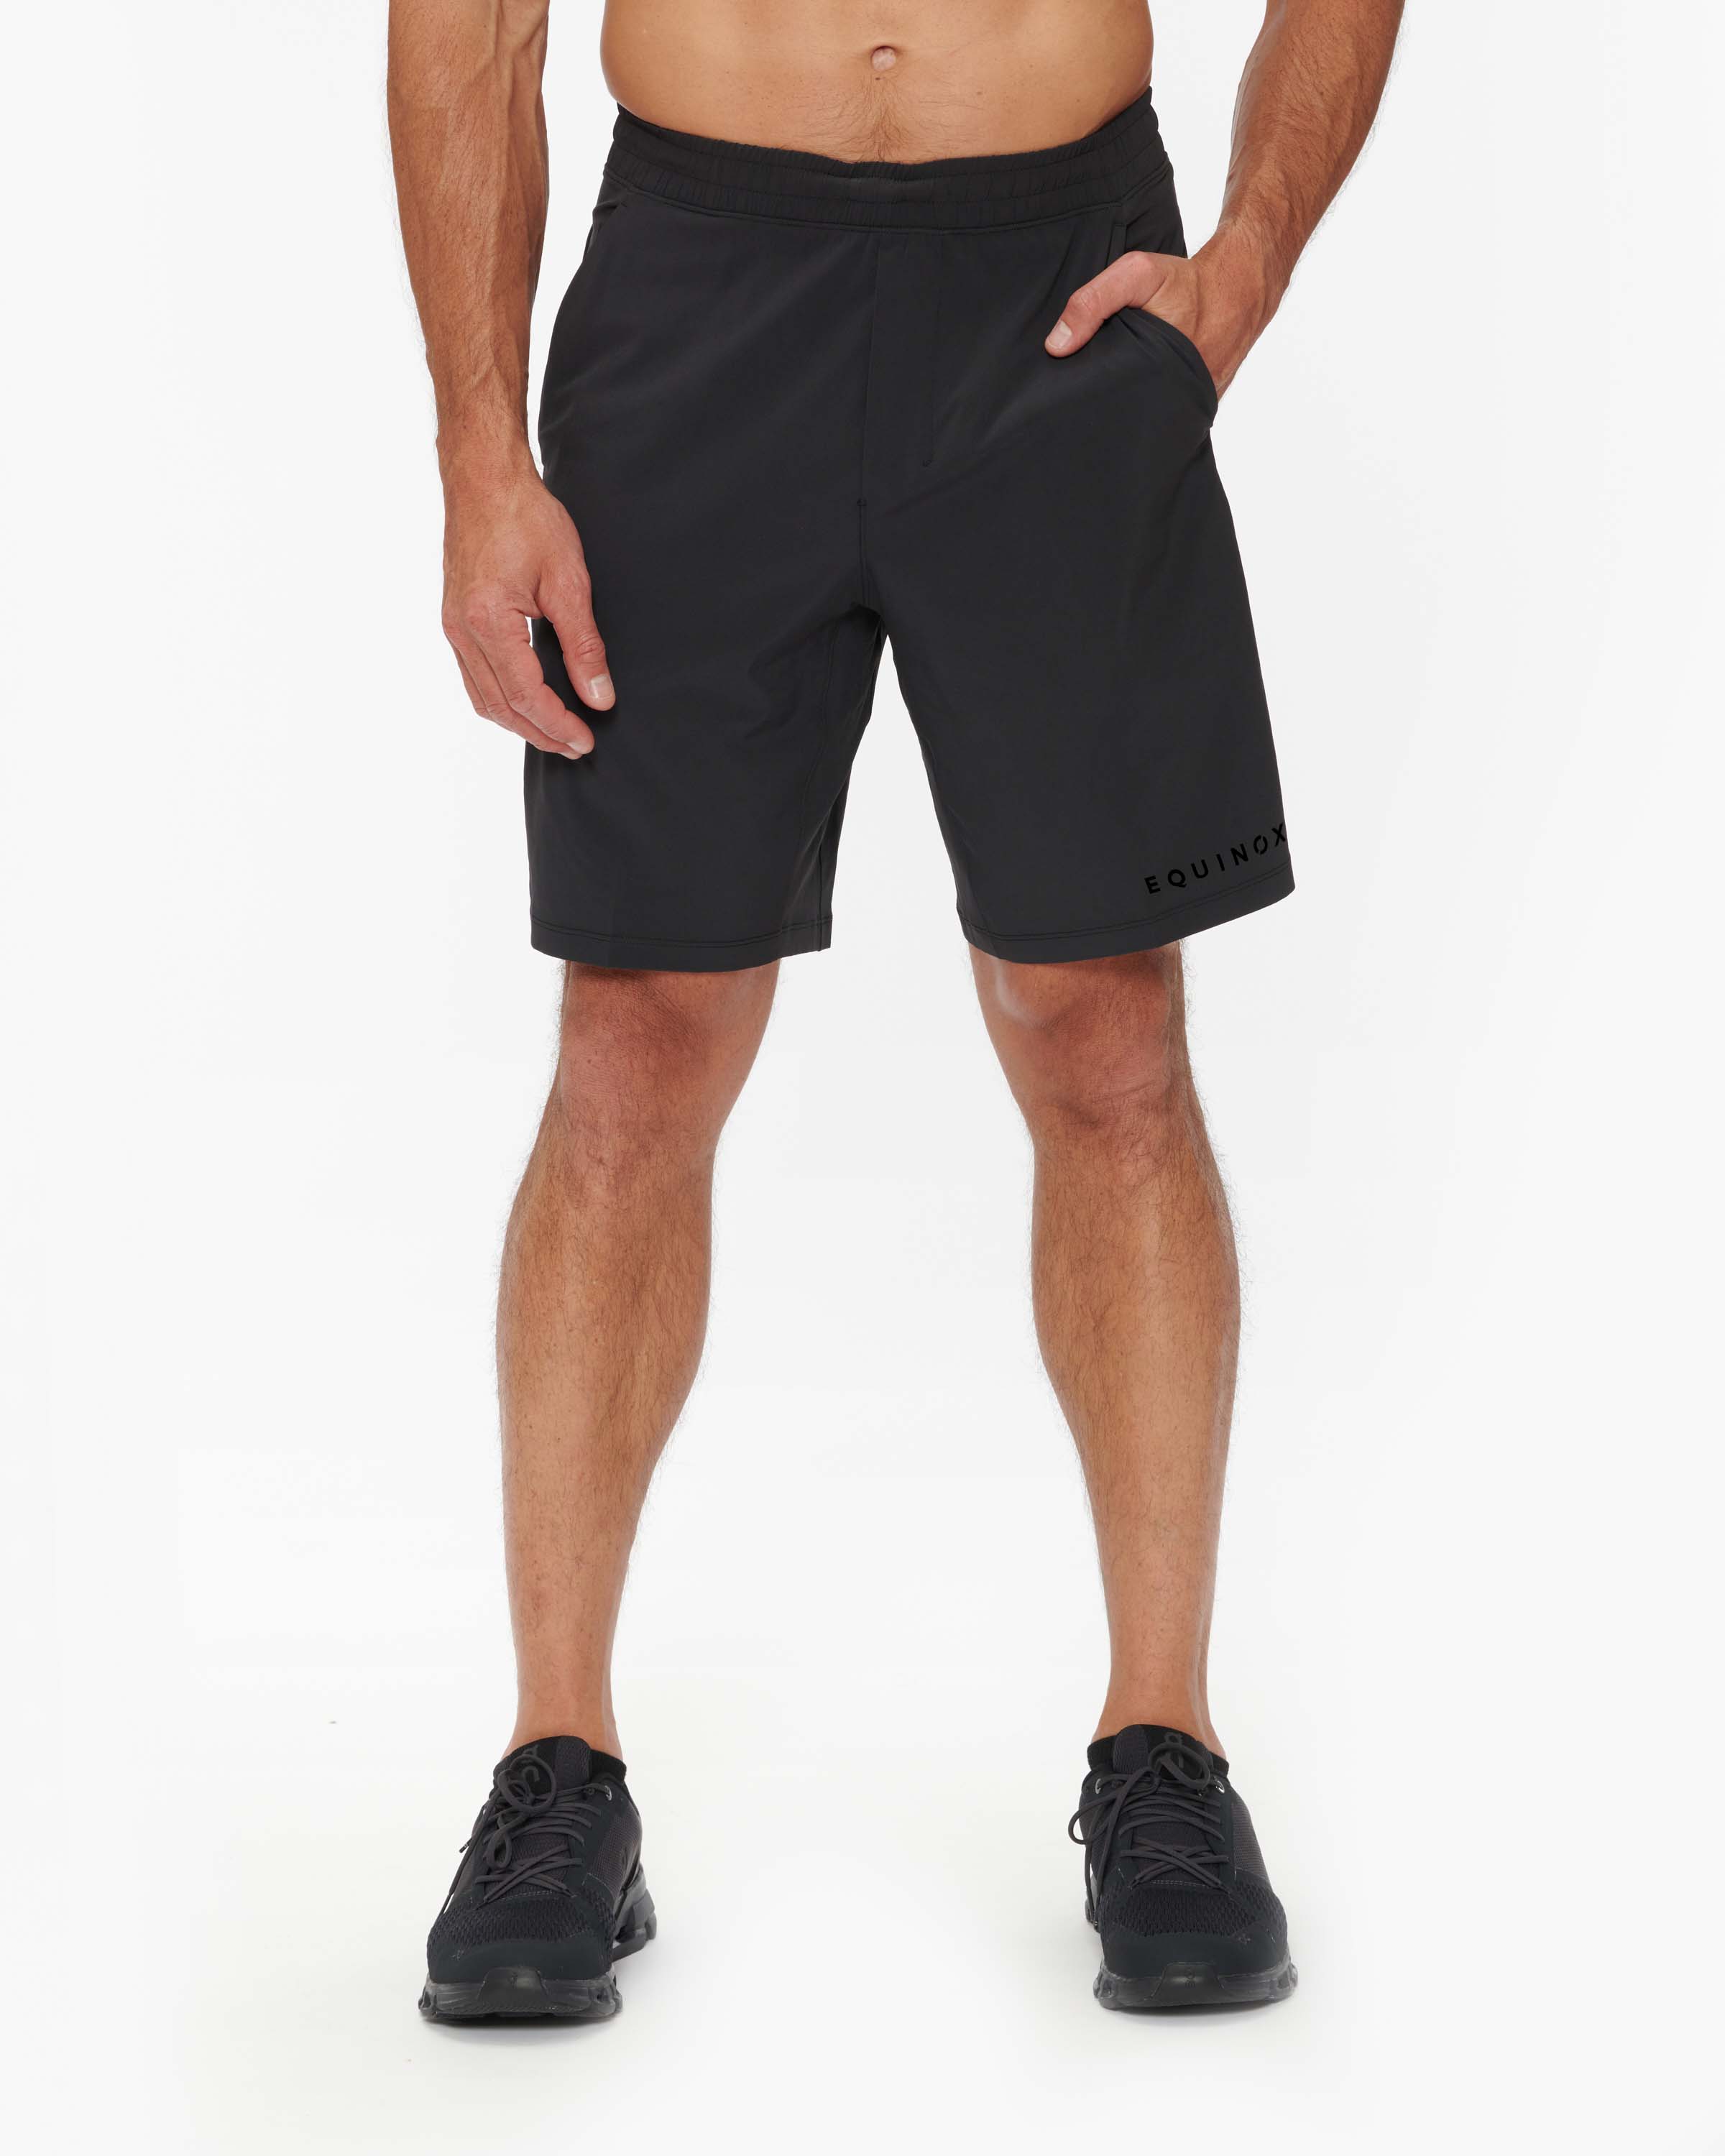 MEN'S SHORTS – Tagged "LULULEMON ATHLETICA" The Shop Equinox